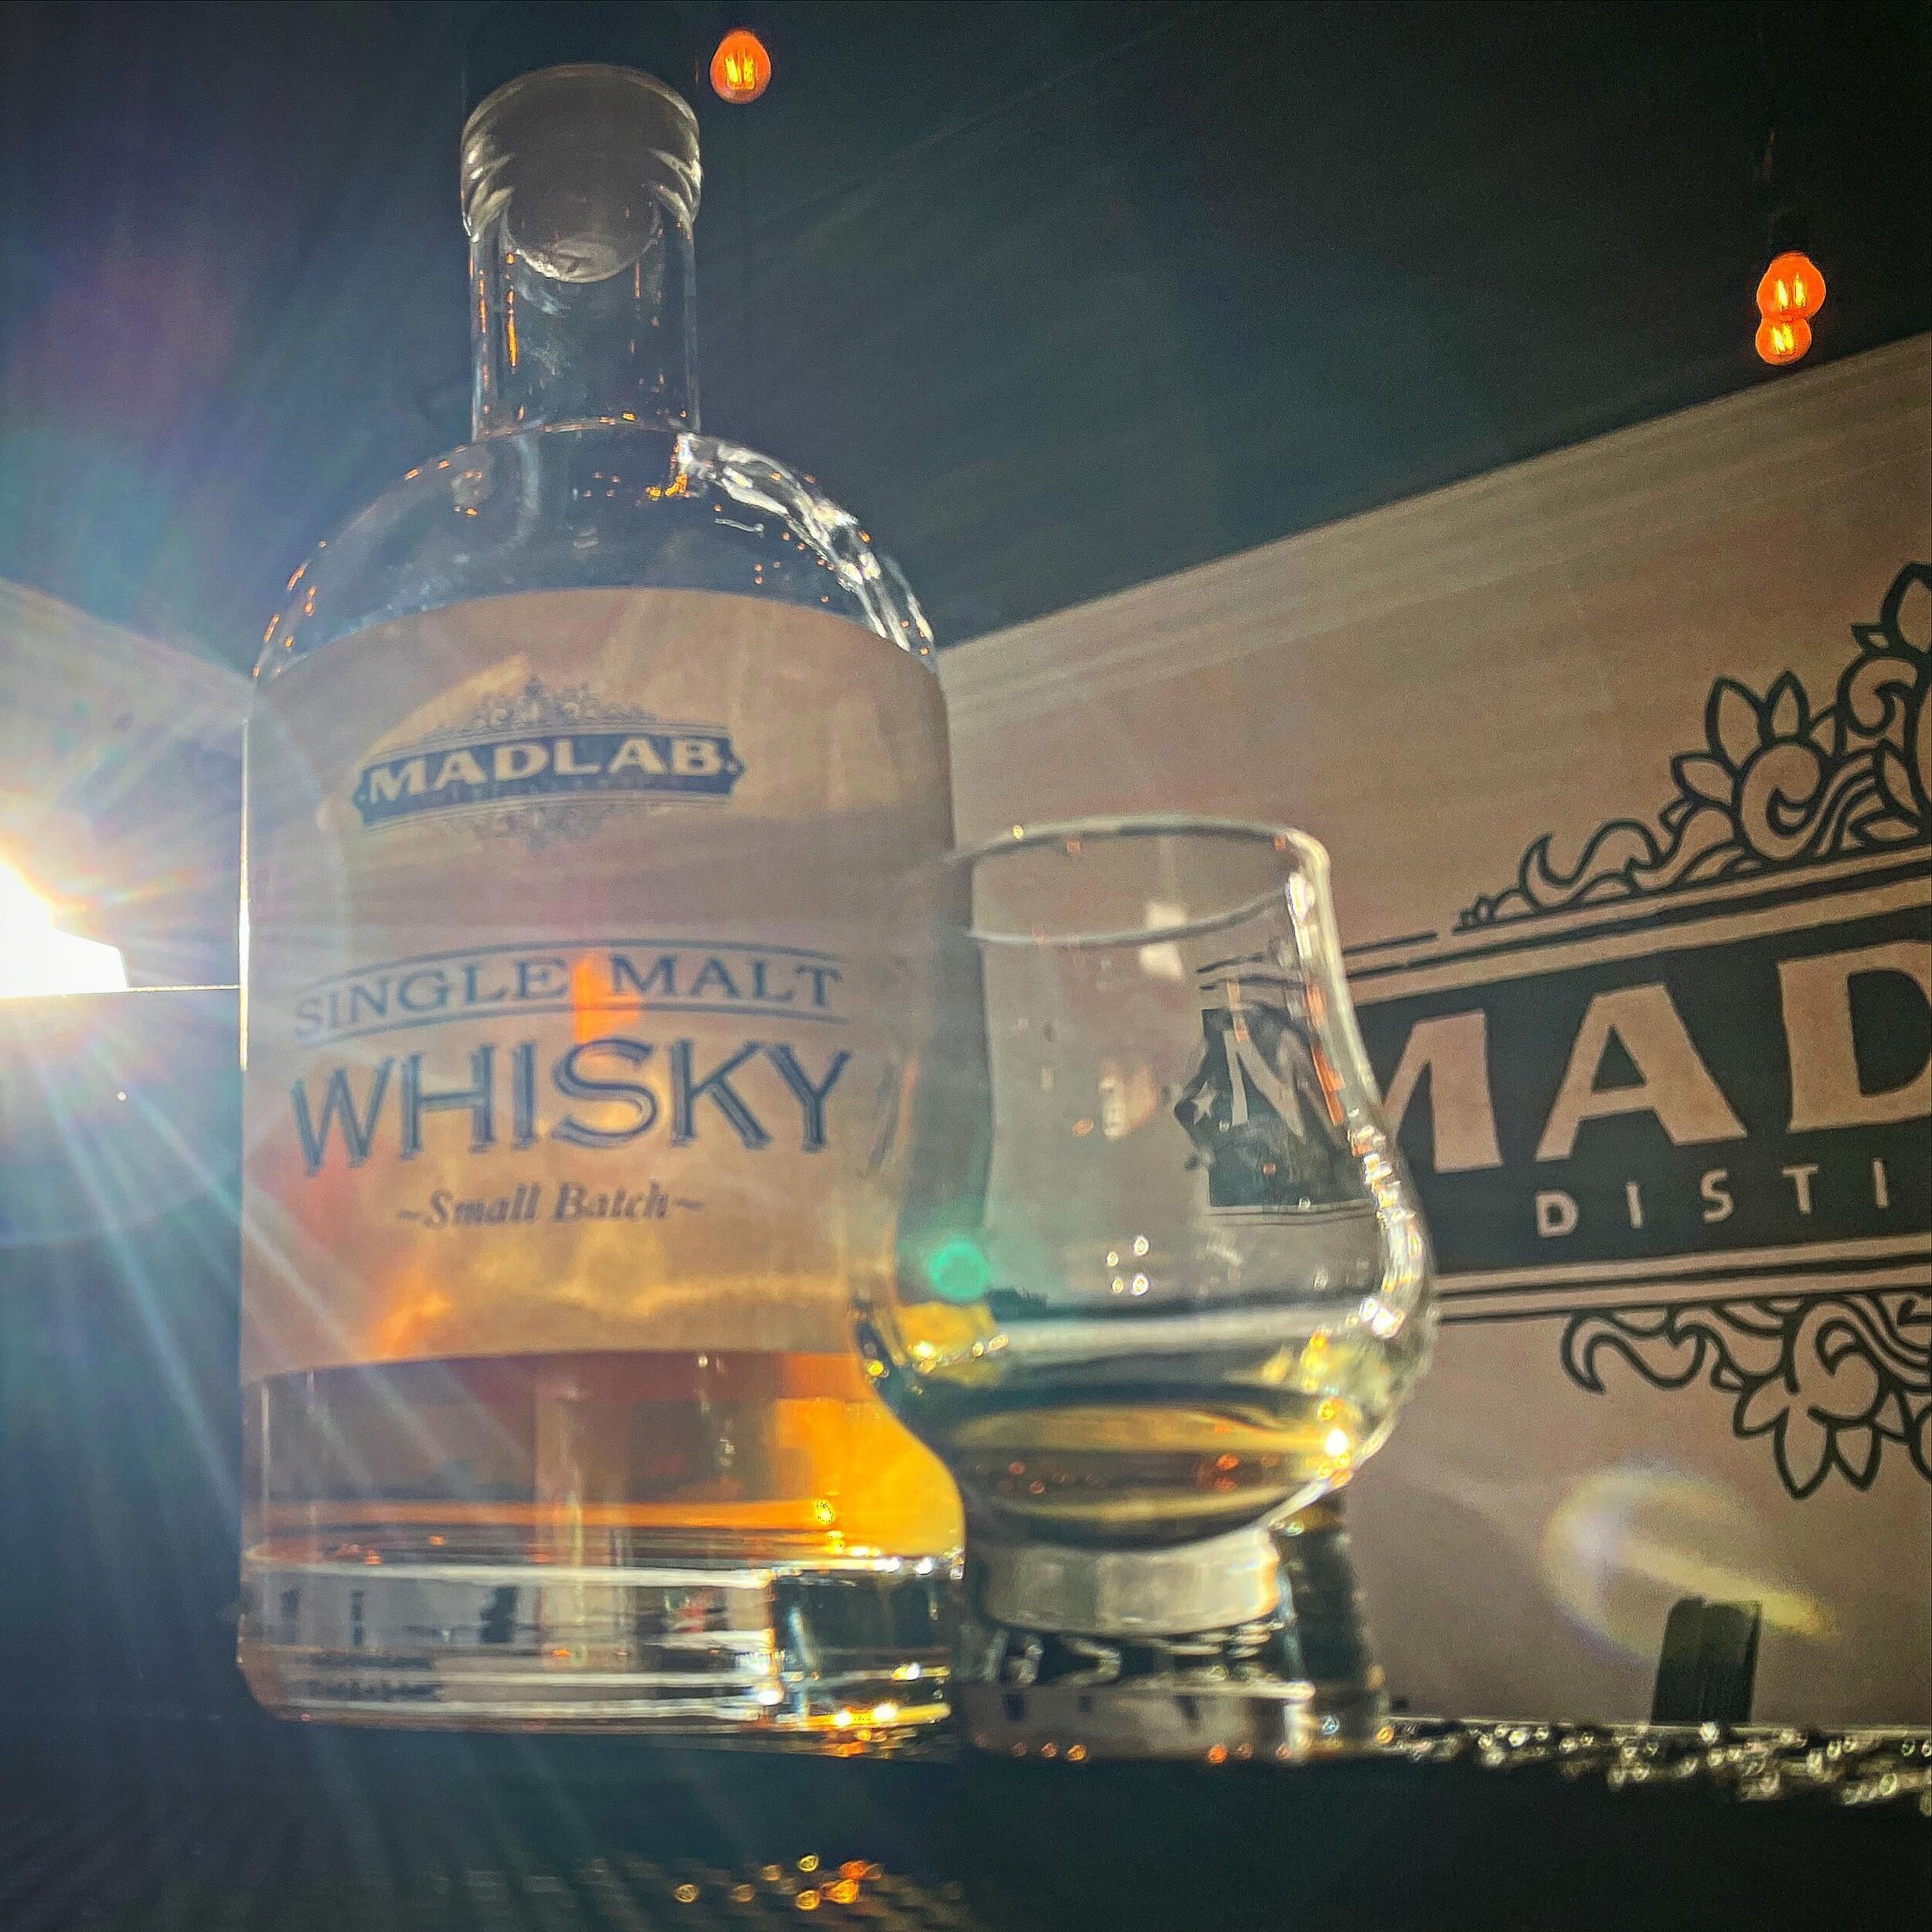 It&rsquo;s a beautiful day for a whisky 

#cheers #itstueadaylemon #sunshine #whiskylover #yvrwhisky #canadianwhisky #yvrdrinks #vancouverwhisky #bcwhisky #bcdistilled #madlab #drinklocal #craftwhisky #vancitydrinks #vancitybuzz #craftspirits #bcspir